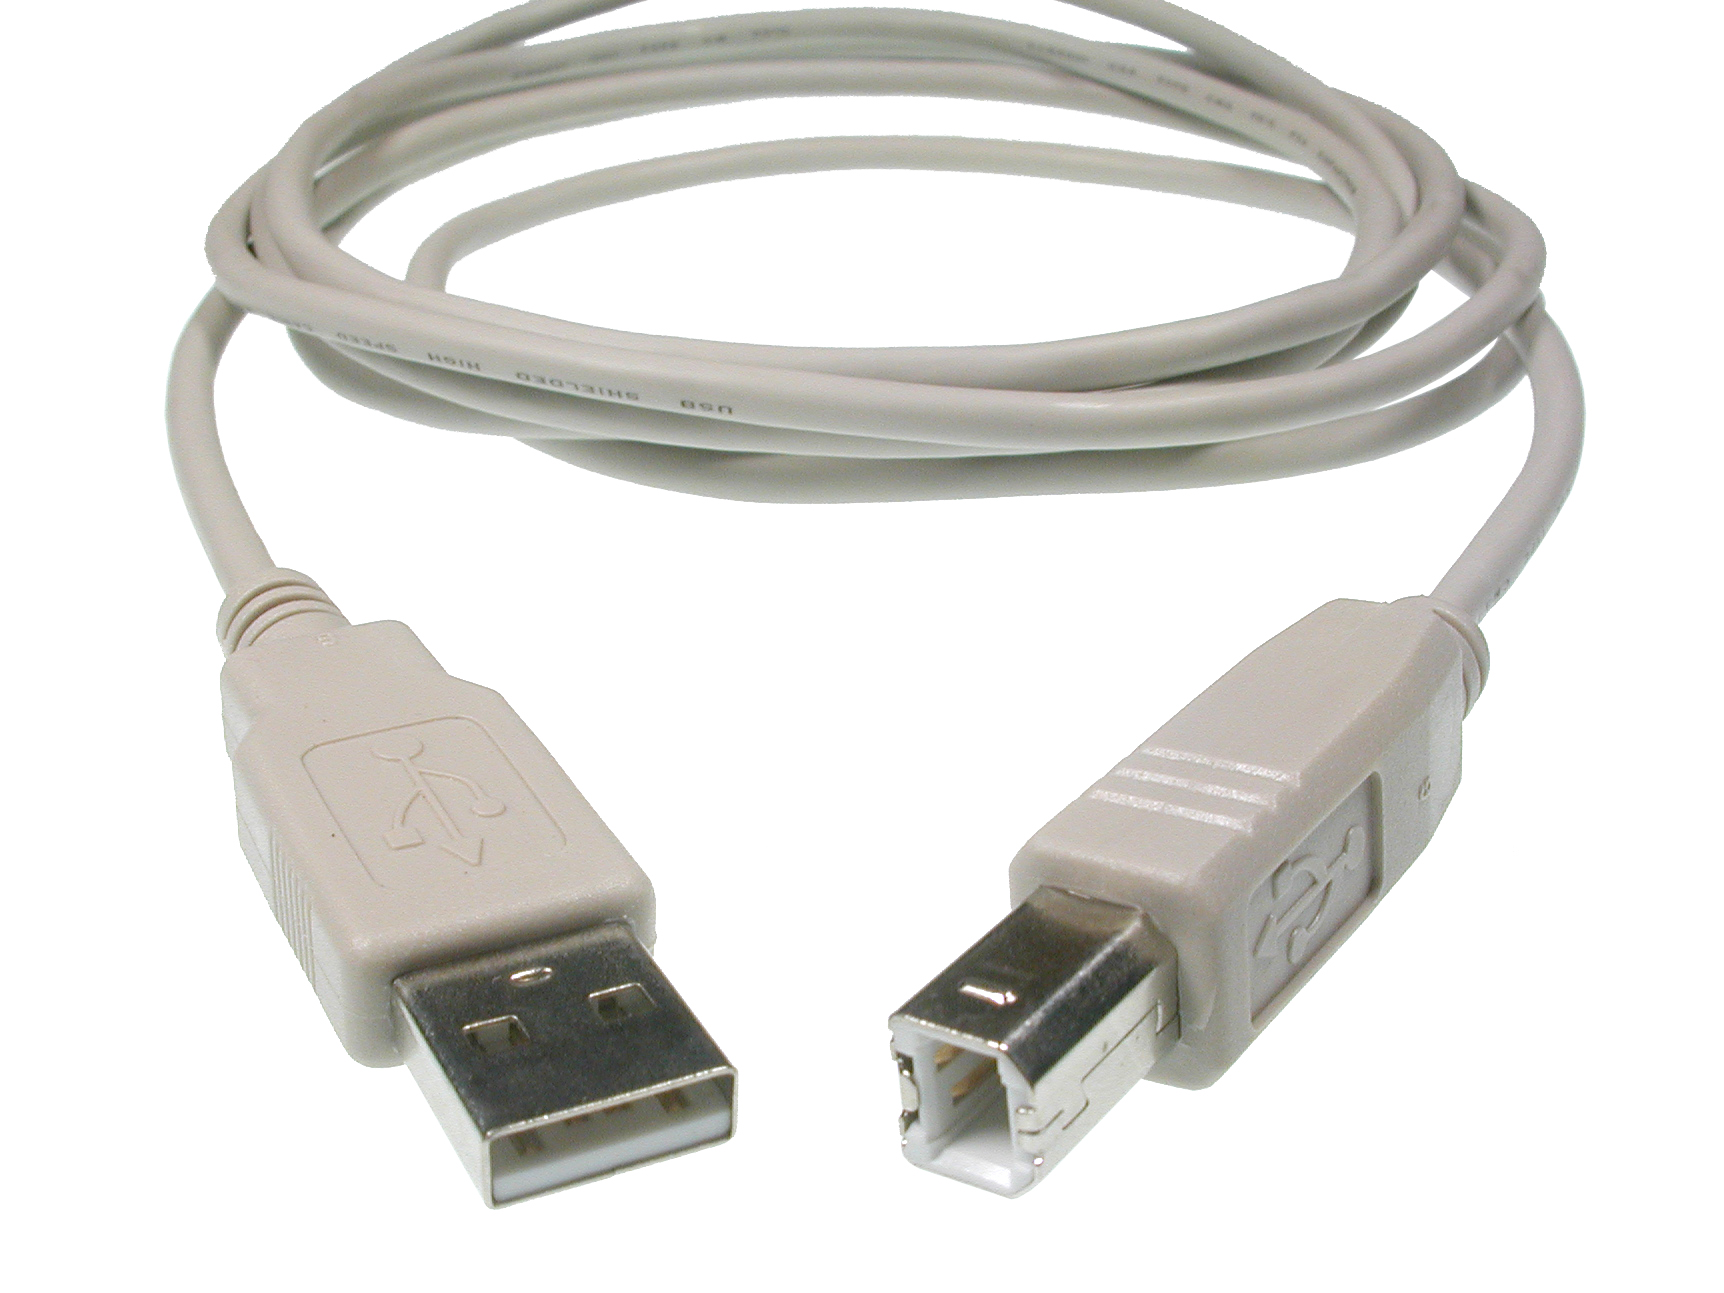 A to B USB Cable, 6 ft :: Solarbotics